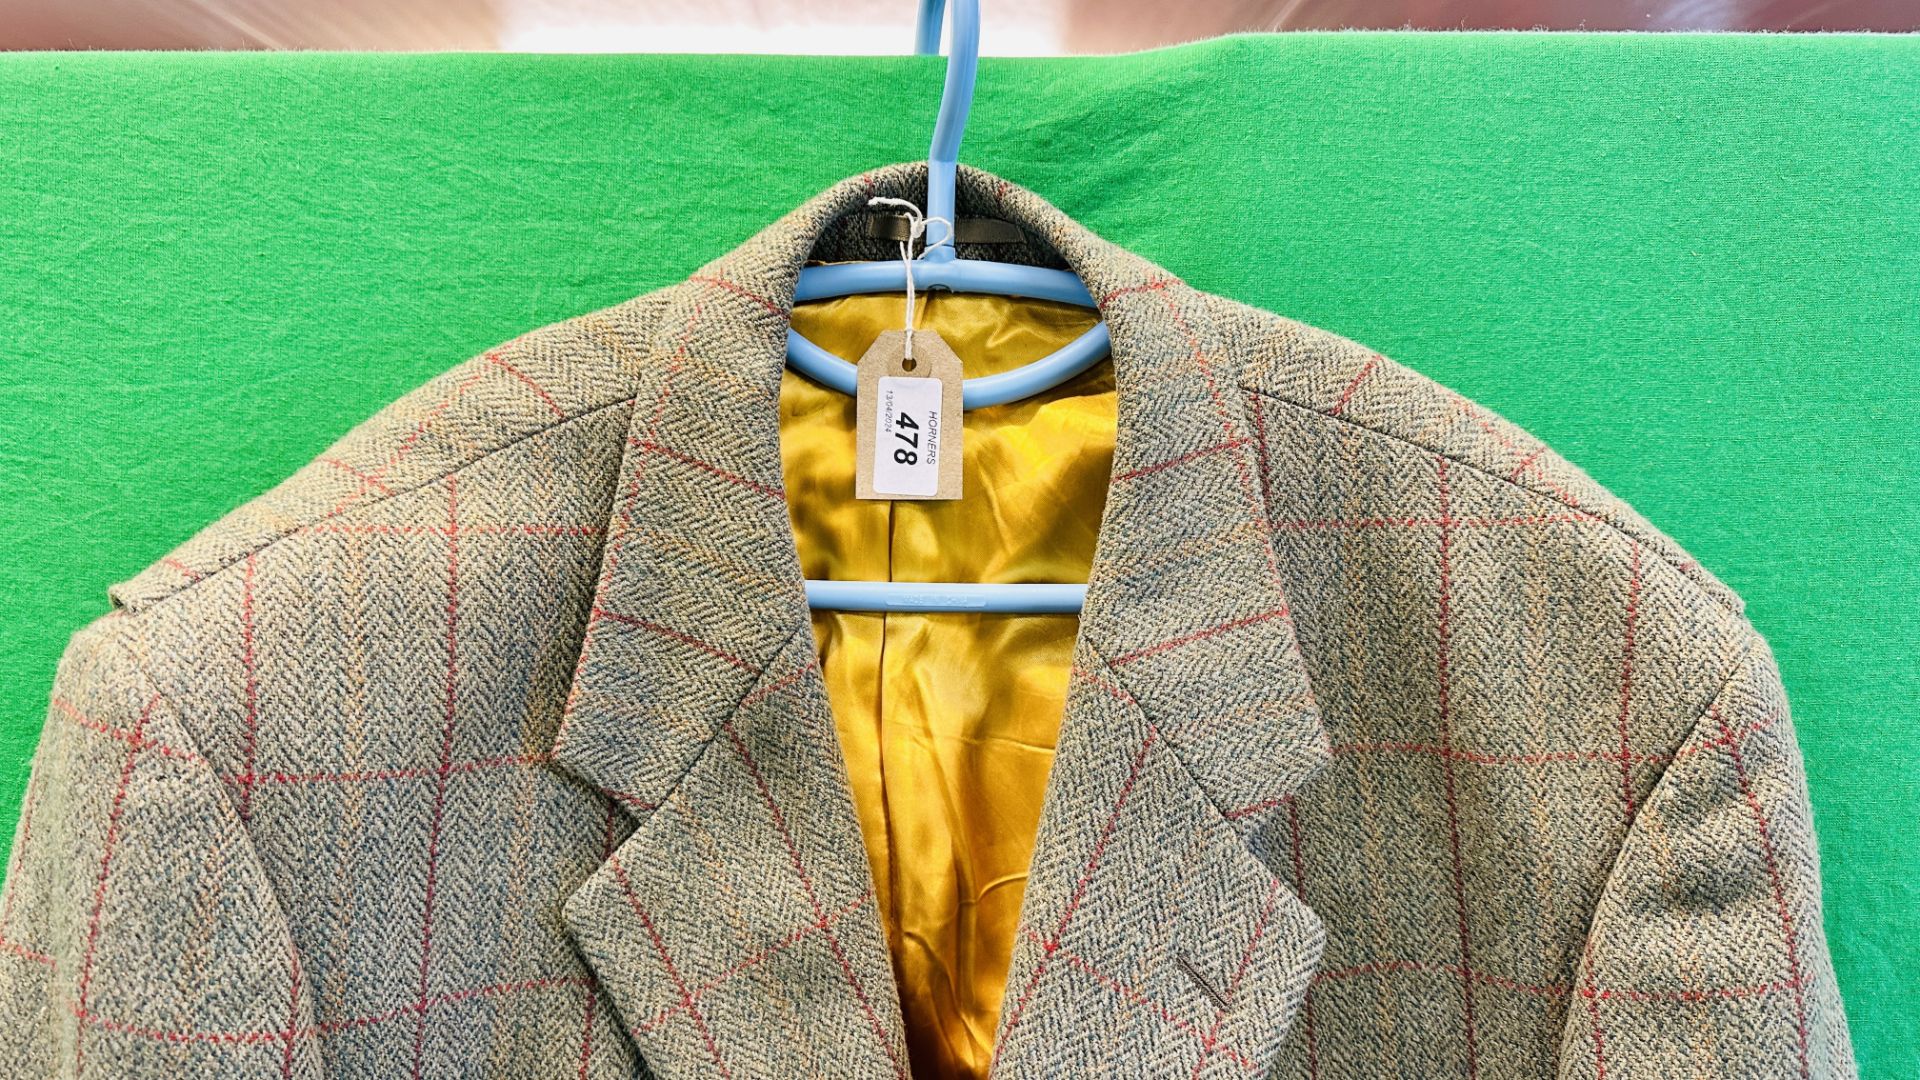 A GENTS RATCATCHER COUNTRY TWEED 100% PURE WOOL JACKET, SIZE 48L. - Image 2 of 5